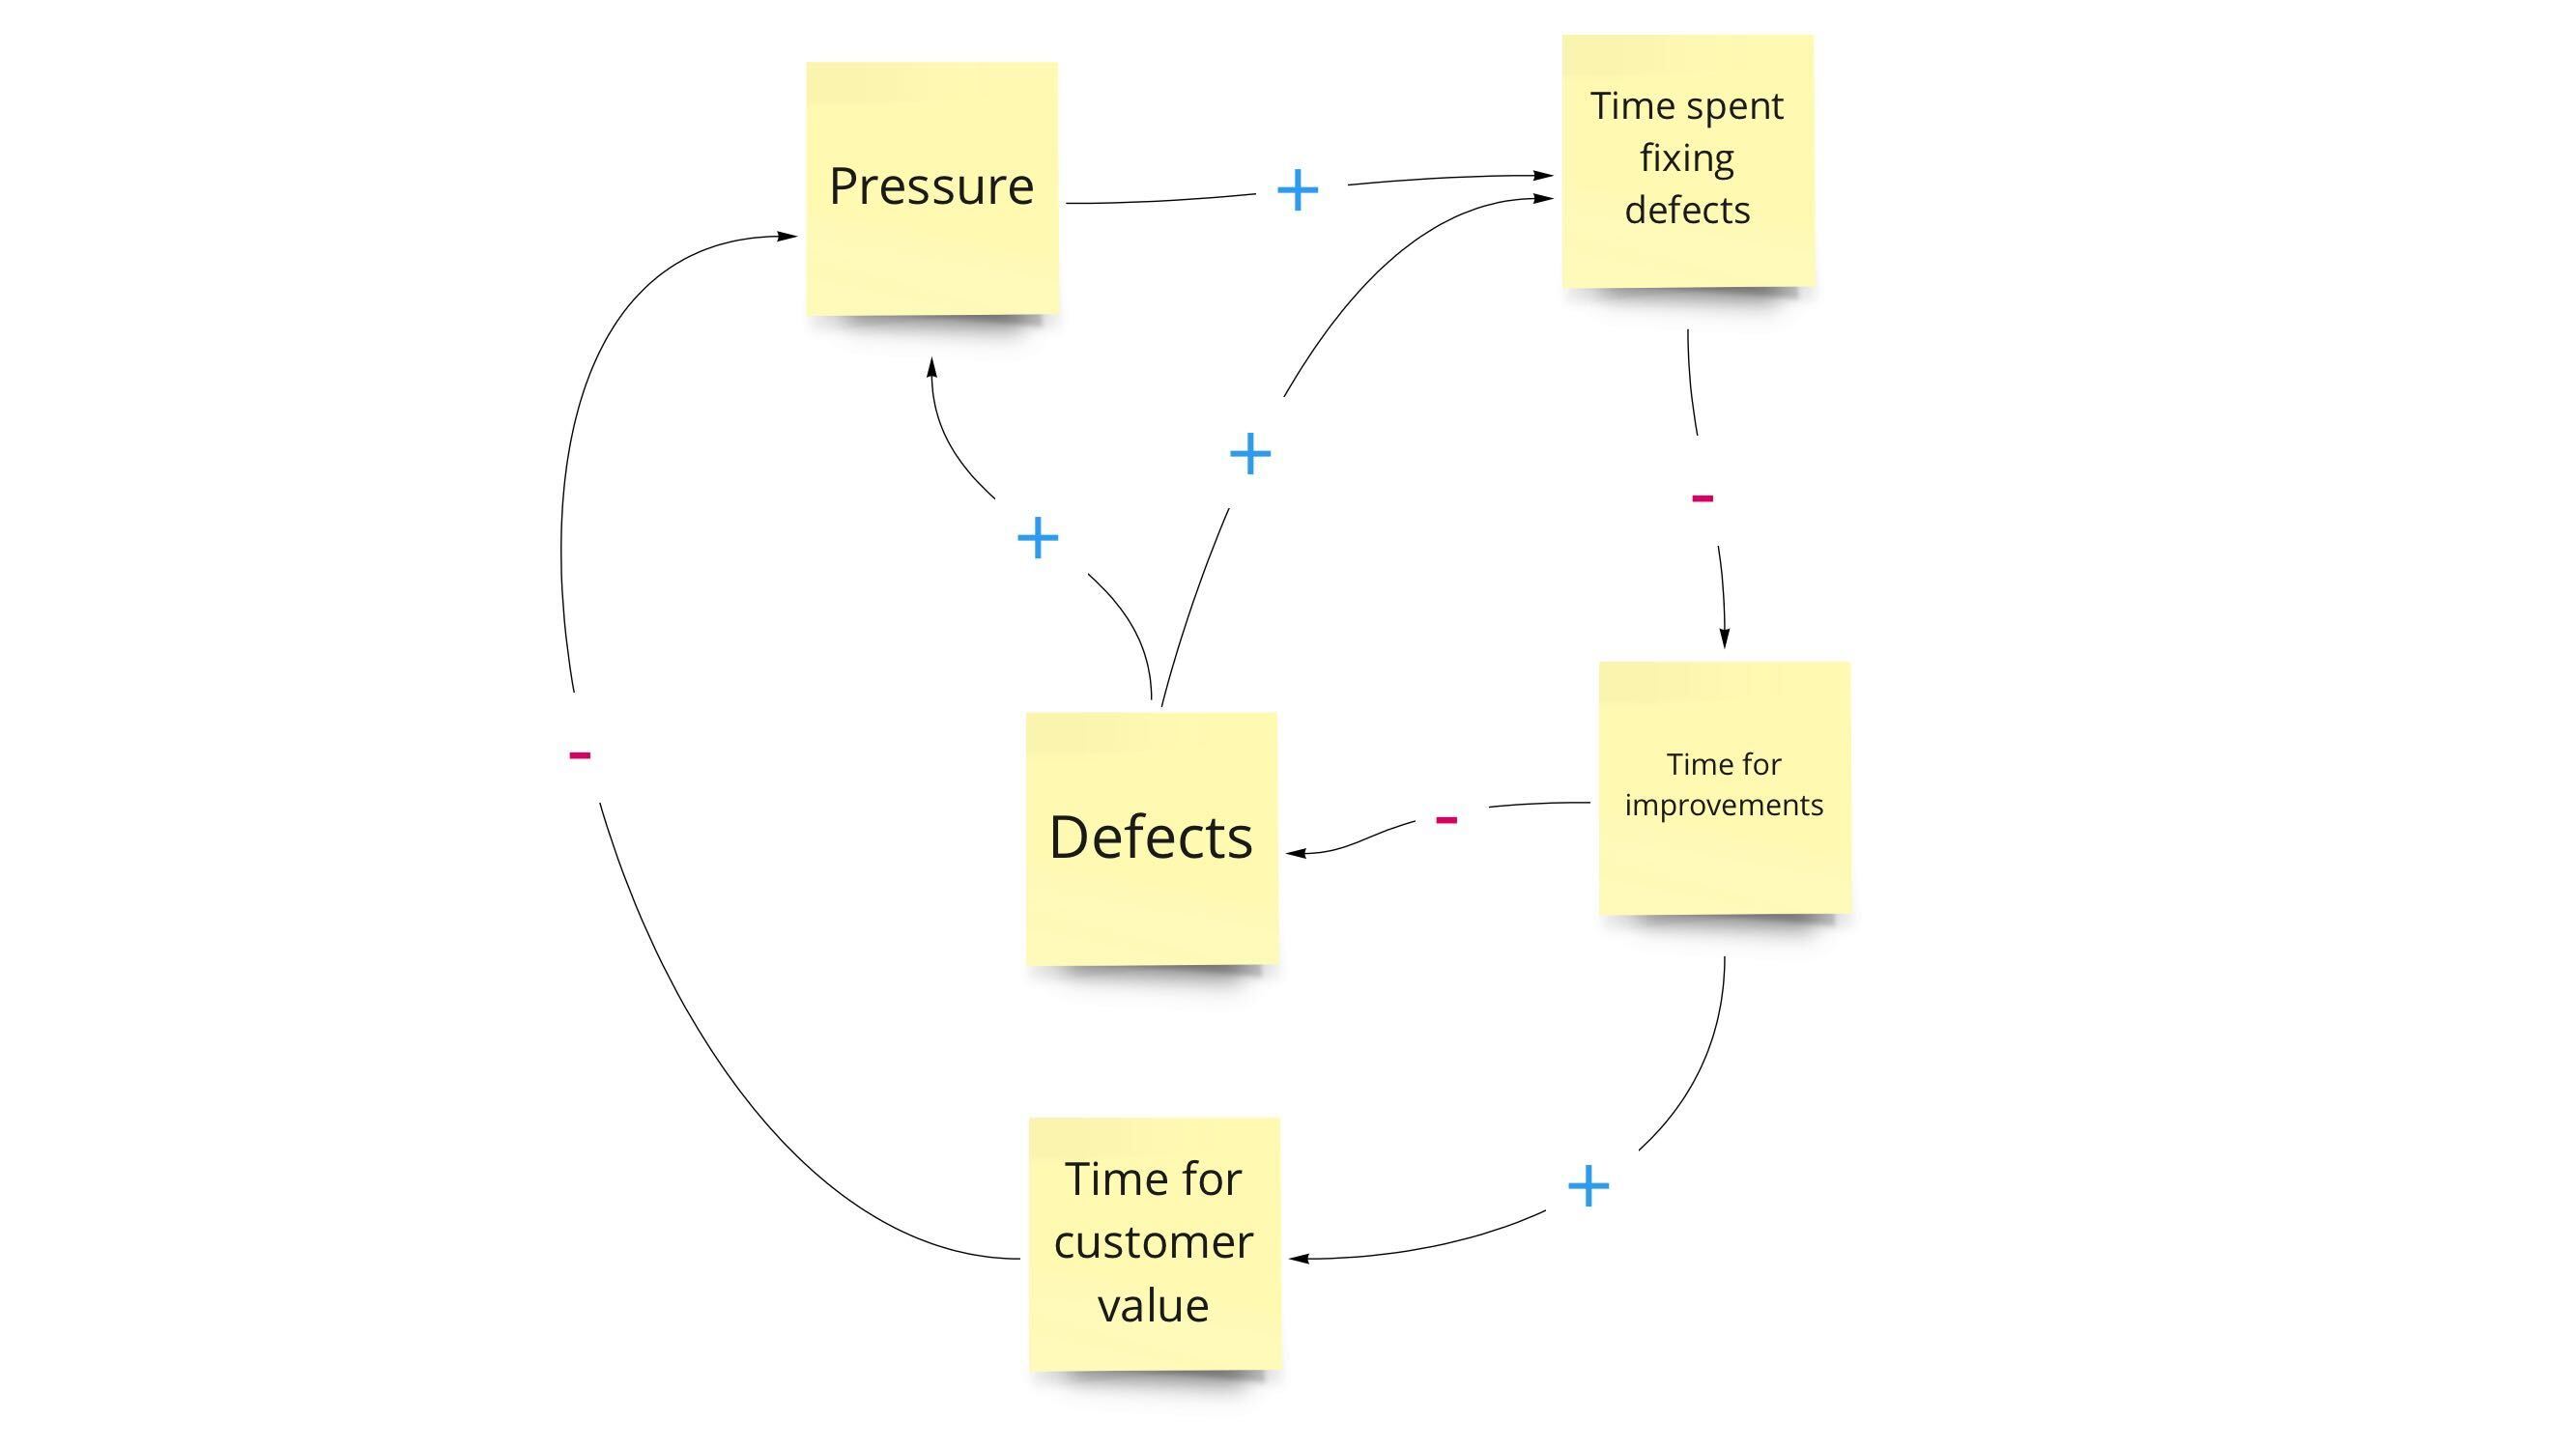 A vicious cycle drawn from the previous text. No time improvements leads to more defects, less time for customer value, which in turn leads to more pressure. More defects also add to the pressure, and both defects and pressure lead to more time spent on defects. More time spent on fixing defects in turn leads to less time for improvements, completing the vicious cycle.  
